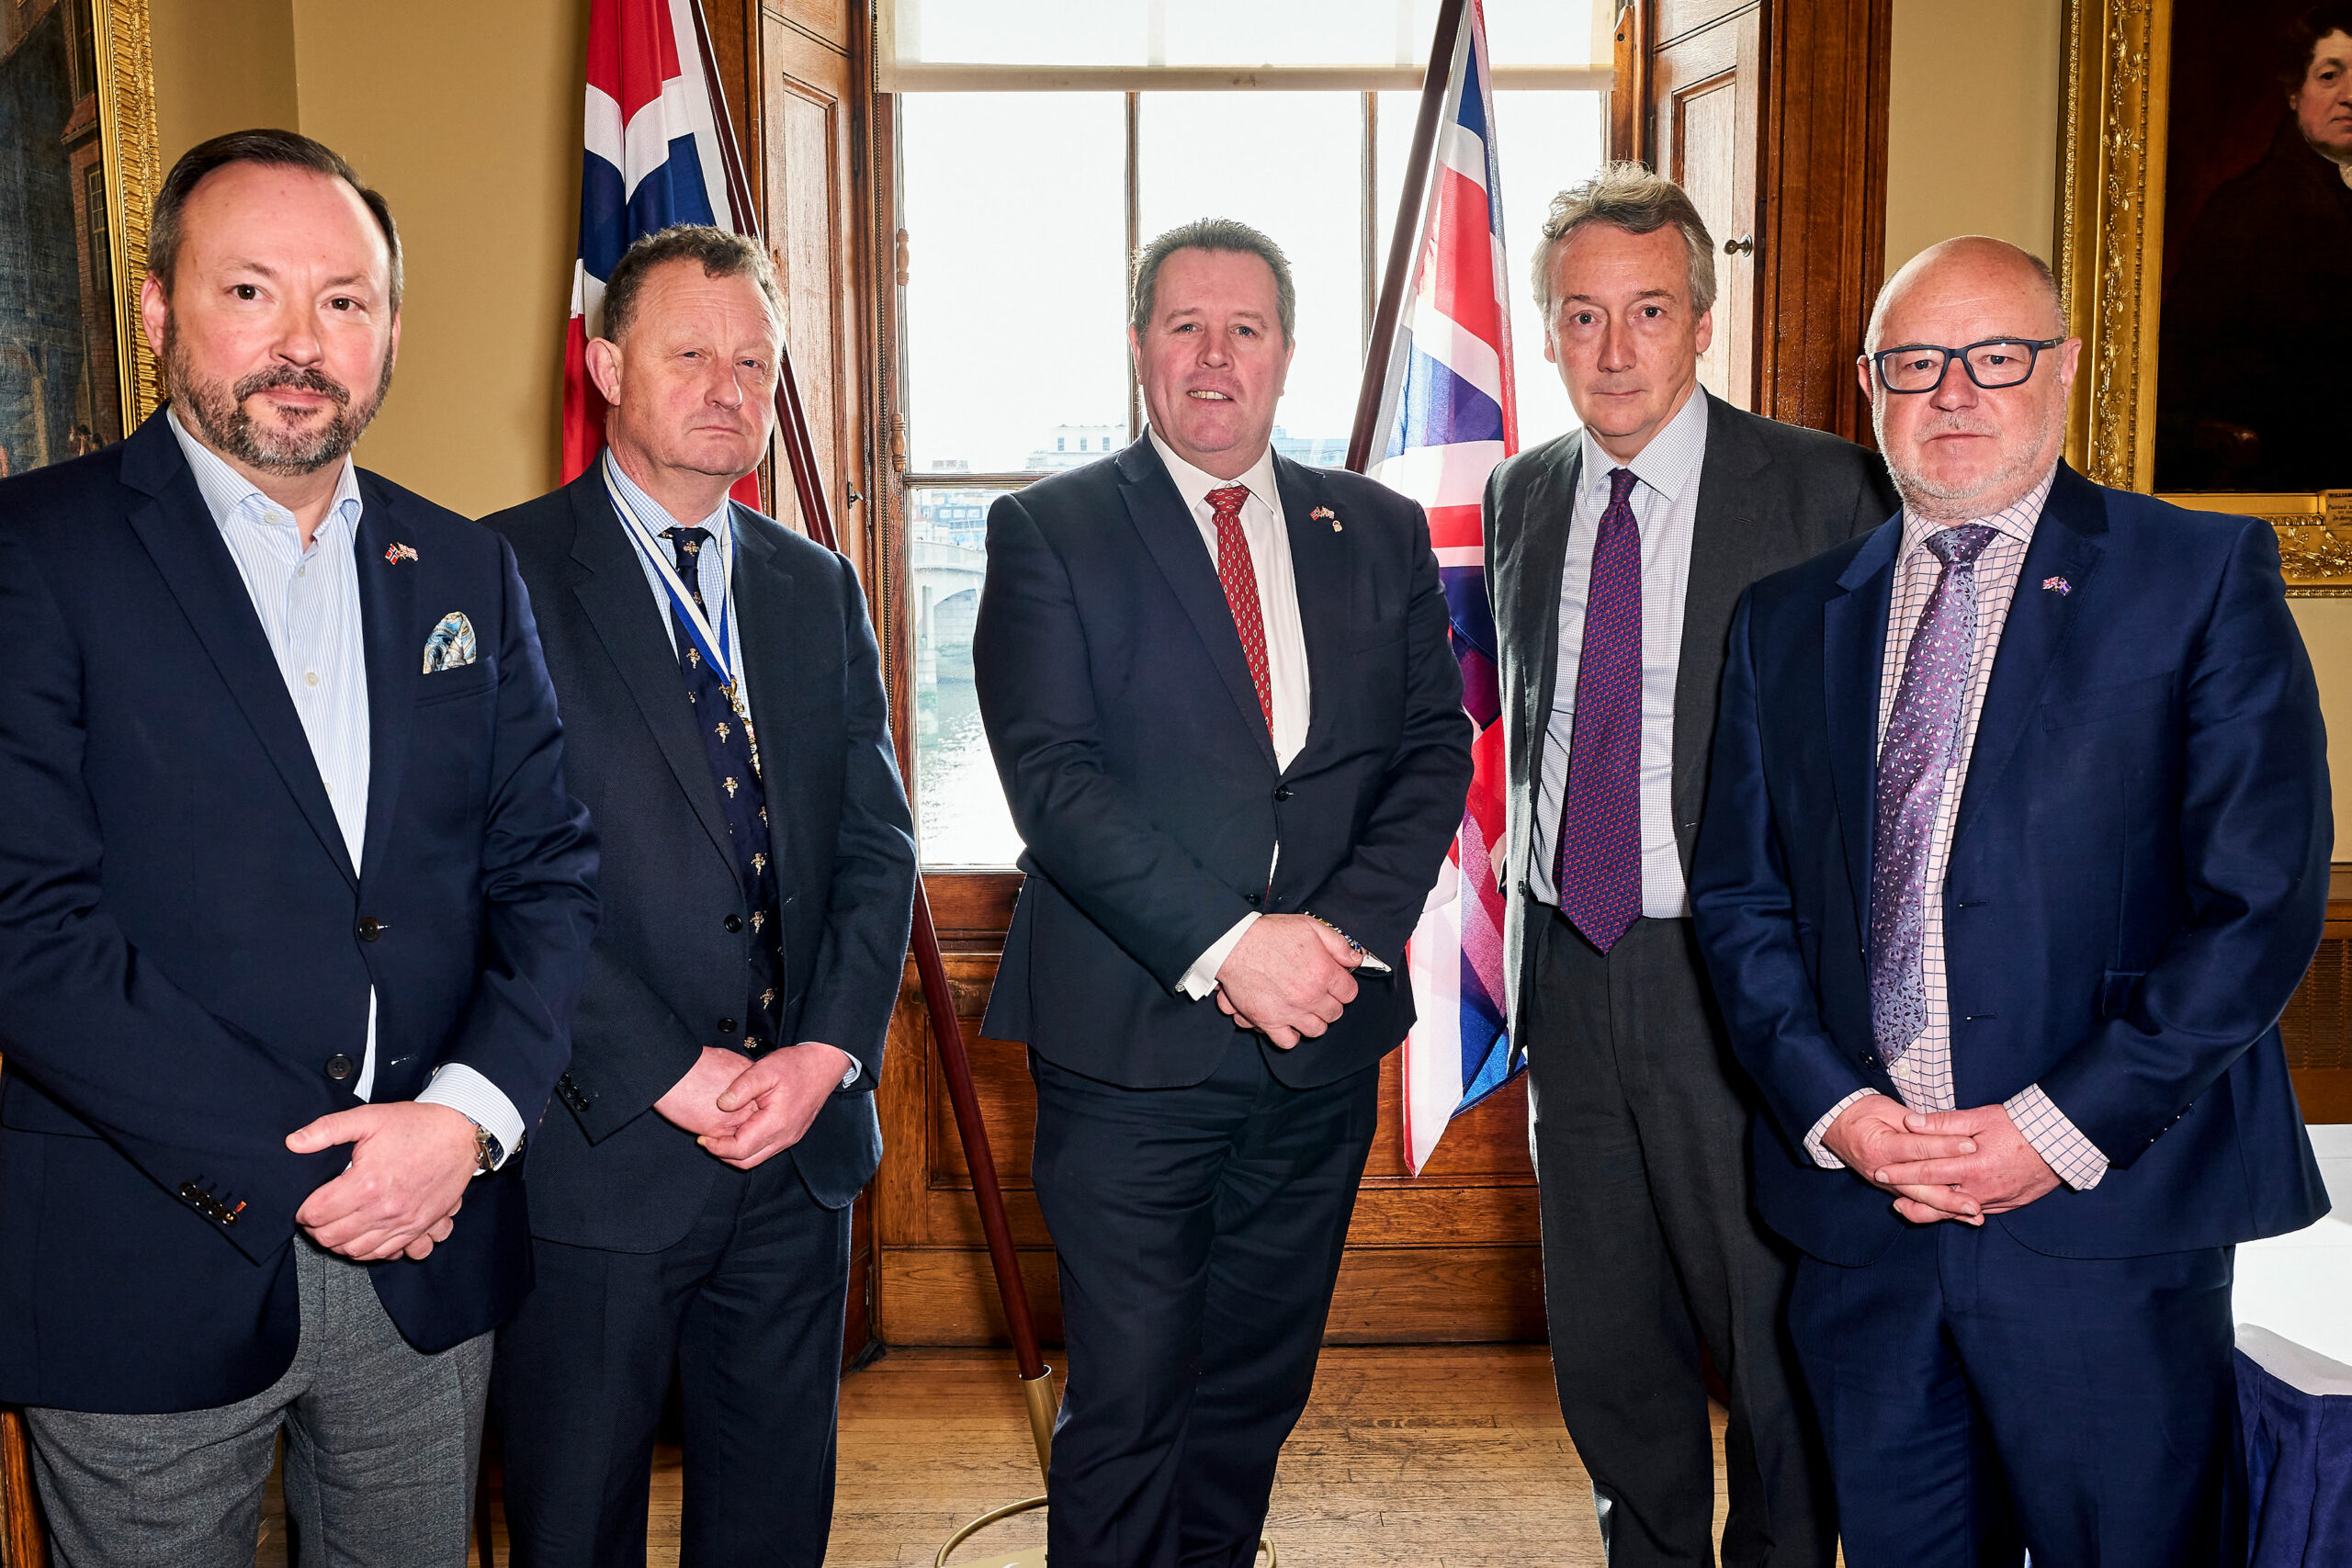 UK and Norway: Forging Collaboration between Independent Coastal States